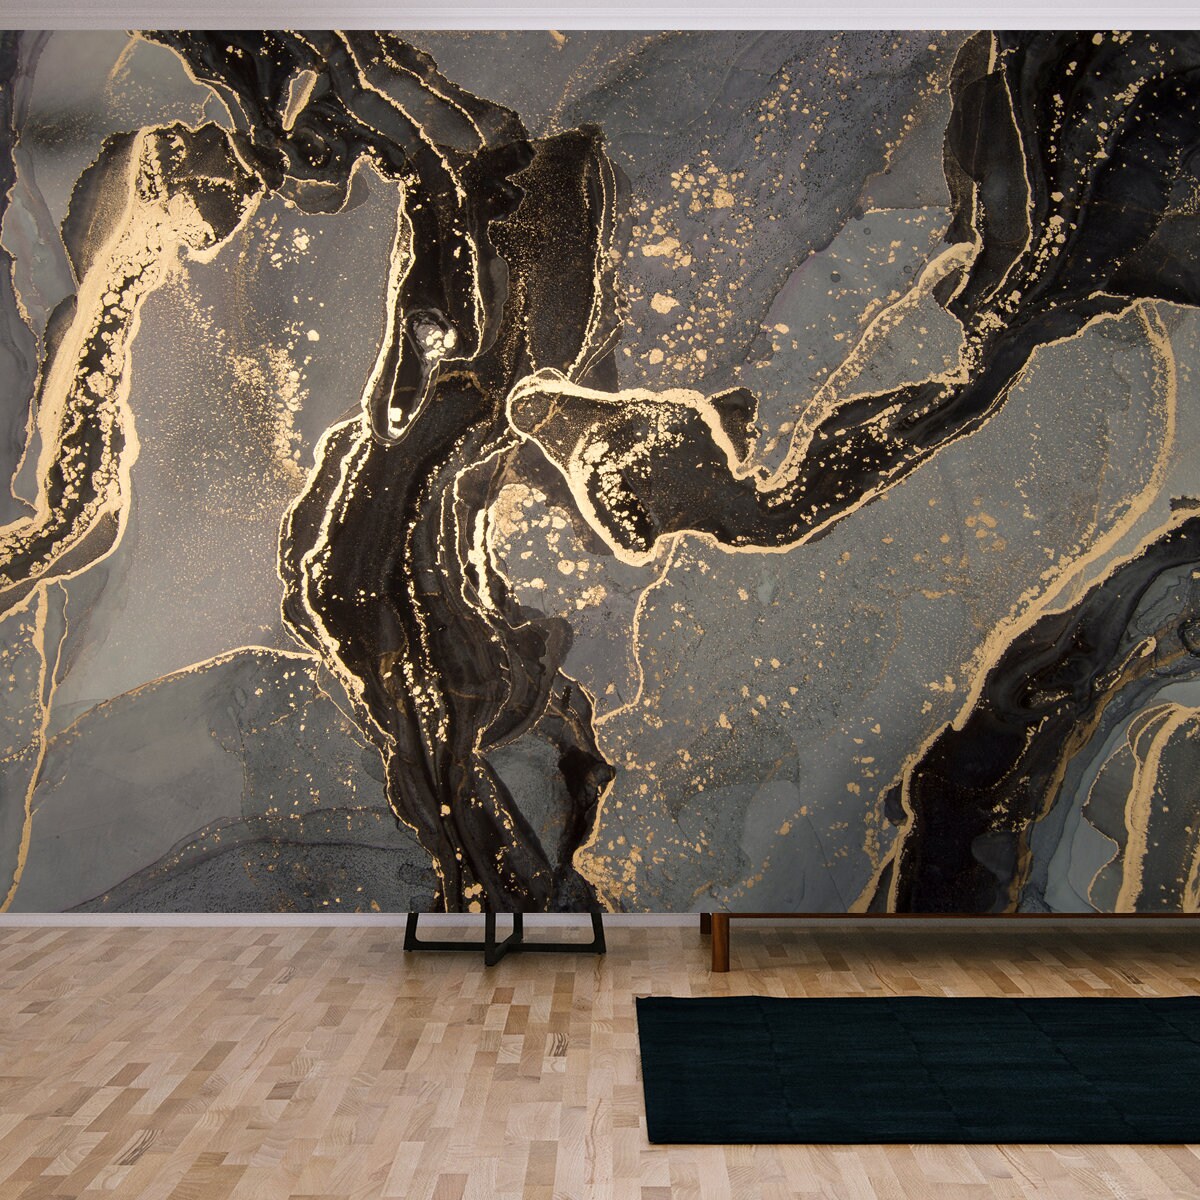 Luxury Abstract Fluid Art Painting in Alcohol Ink Technique, Mixture of Black, Gray and Gold Paints Wallpaper Living Room Mural